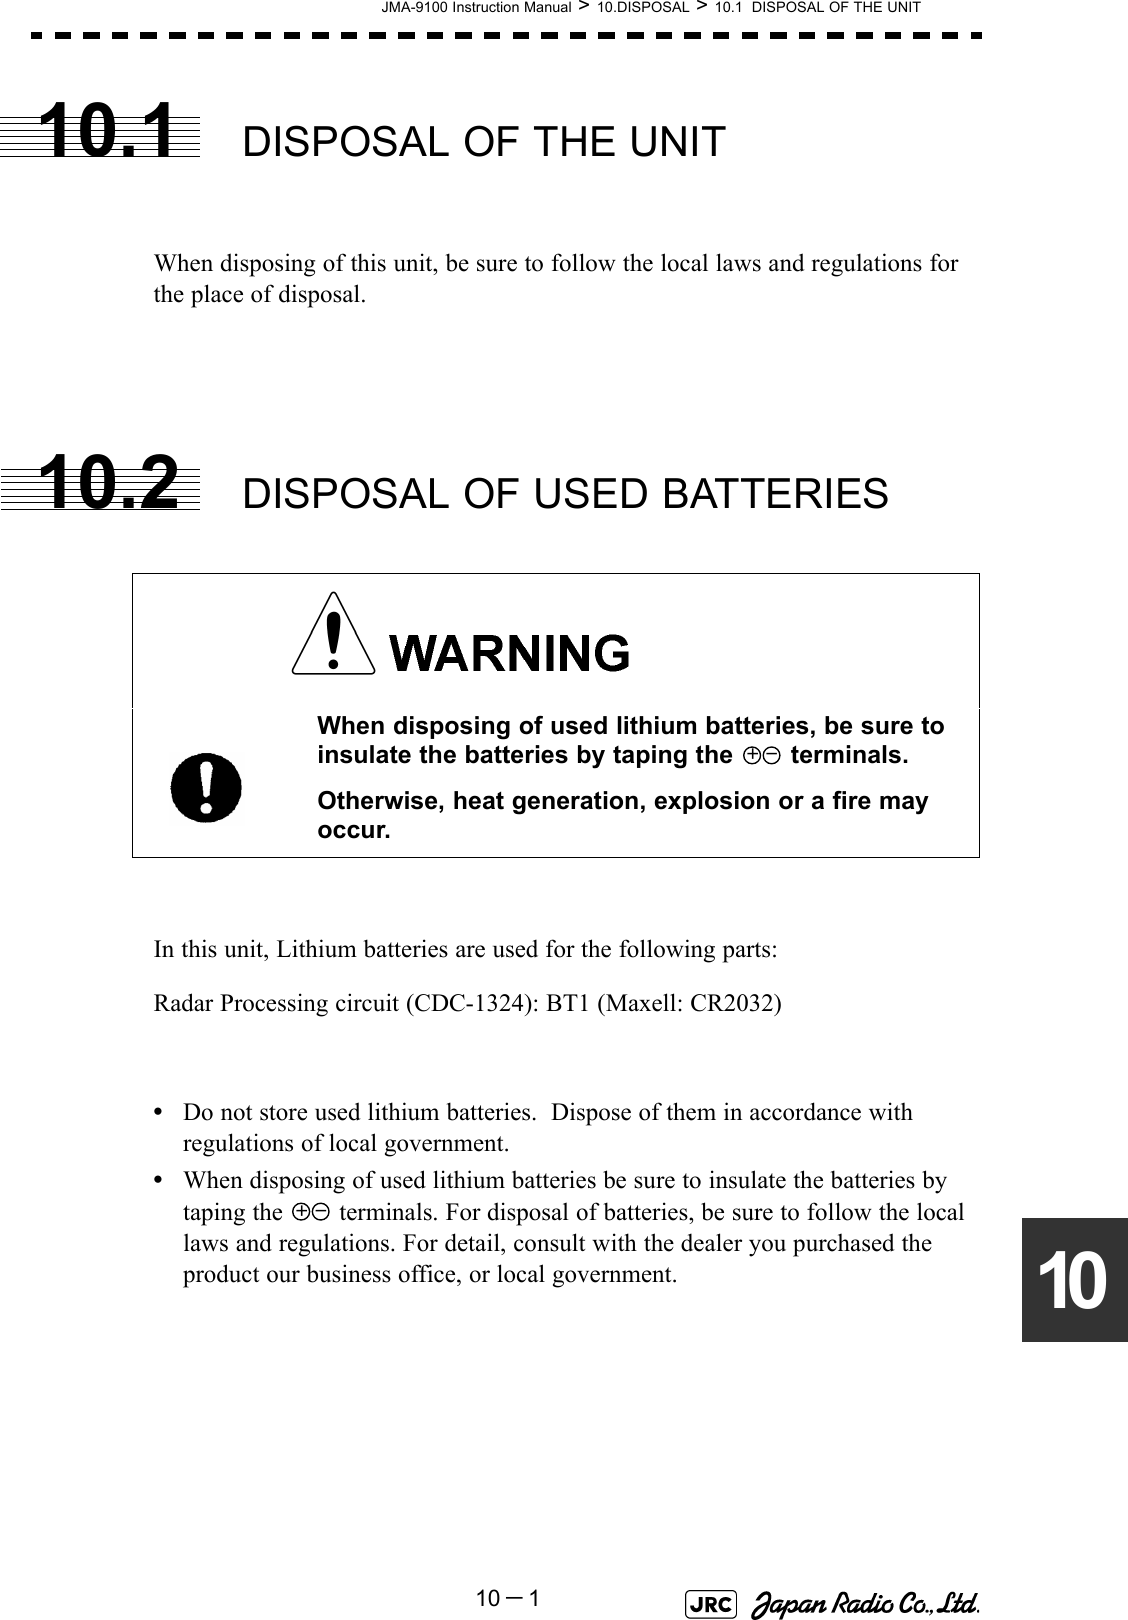 JMA-9100 Instruction Manual &gt; 10.DISPOSAL &gt; 10.1  DISPOSAL OF THE UNIT10－11010.1 DISPOSAL OF THE UNITWhen disposing of this unit, be sure to follow the local laws and regulations for the place of disposal. 10.2 DISPOSAL OF USED BATTERIESIn this unit, Lithium batteries are used for the following parts:Radar Processing circuit (CDC-1324): BT1 (Maxell: CR2032)•Do not store used lithium batteries.  Dispose of them in accordance with regulations of local government.•When disposing of used lithium batteries be sure to insulate the batteries by taping the   terminals. For disposal of batteries, be sure to follow the local laws and regulations. For detail, consult with the dealer you purchased the product our business office, or local government. When disposing of used lithium batteries, be sure to insulate the batteries by taping the   terminals.Otherwise, heat generation, explosion or a fire may occur.+ -+ -